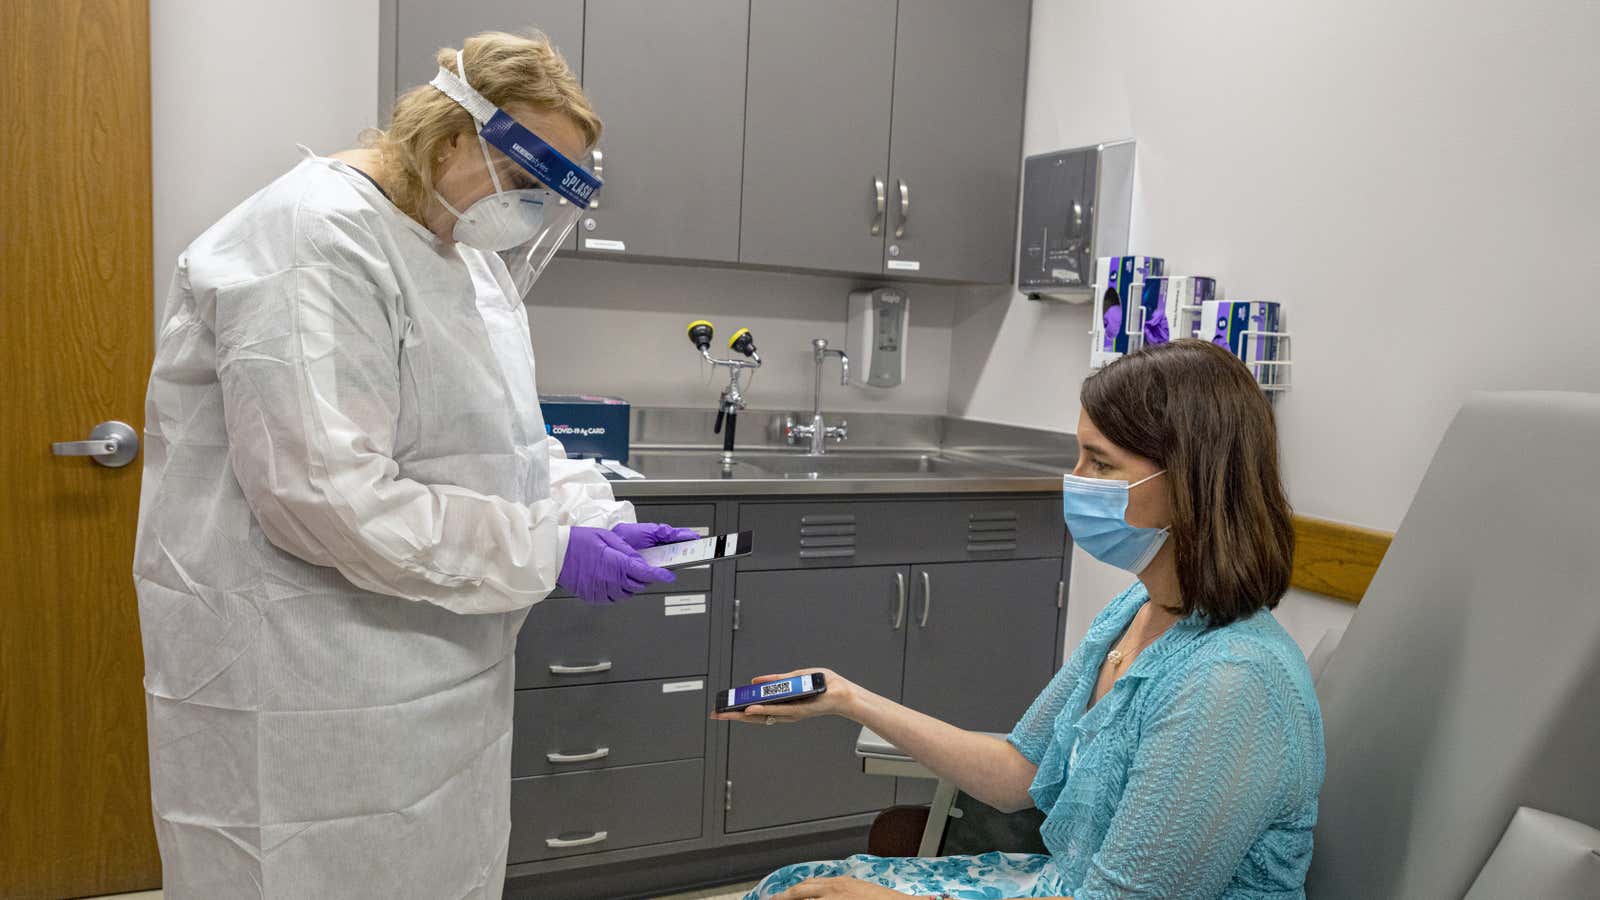 A doctor users her phone to scan the screen a patient’s smartphone, which displays a large QR code.